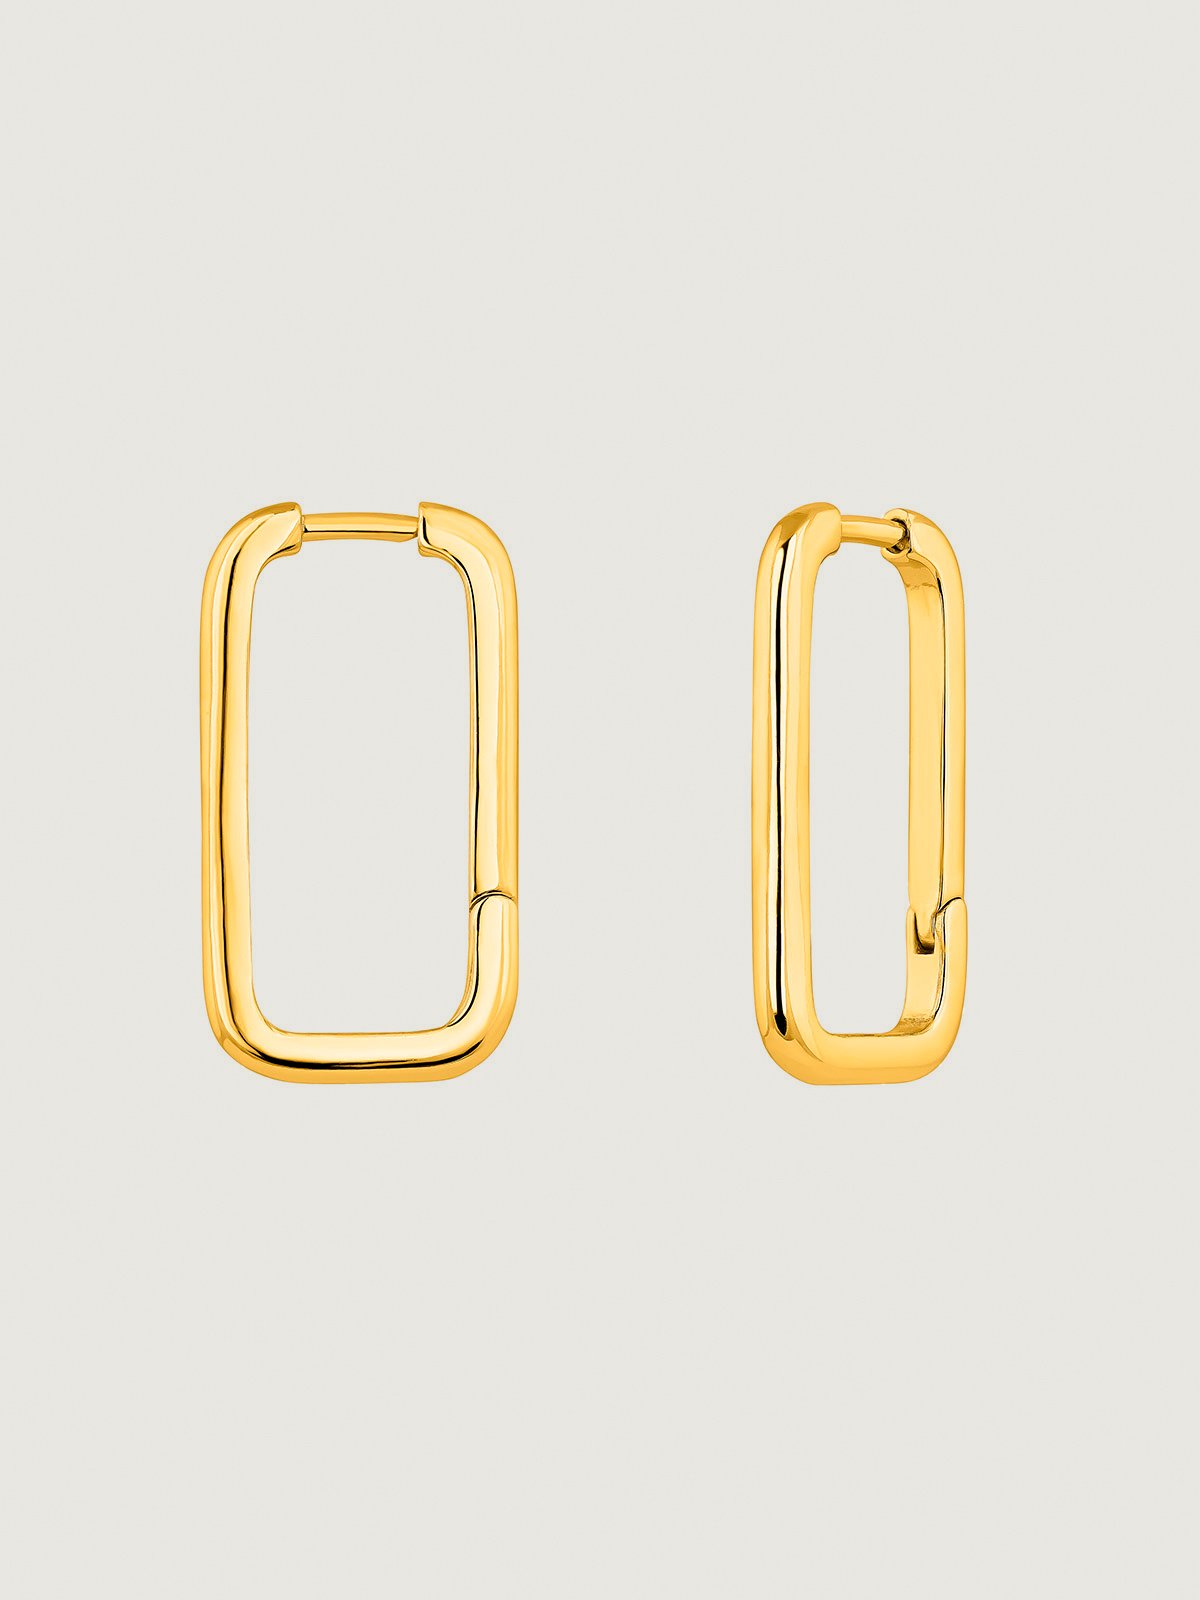 Rectangular earrings made of 925 silver coated in 18K yellow gold.